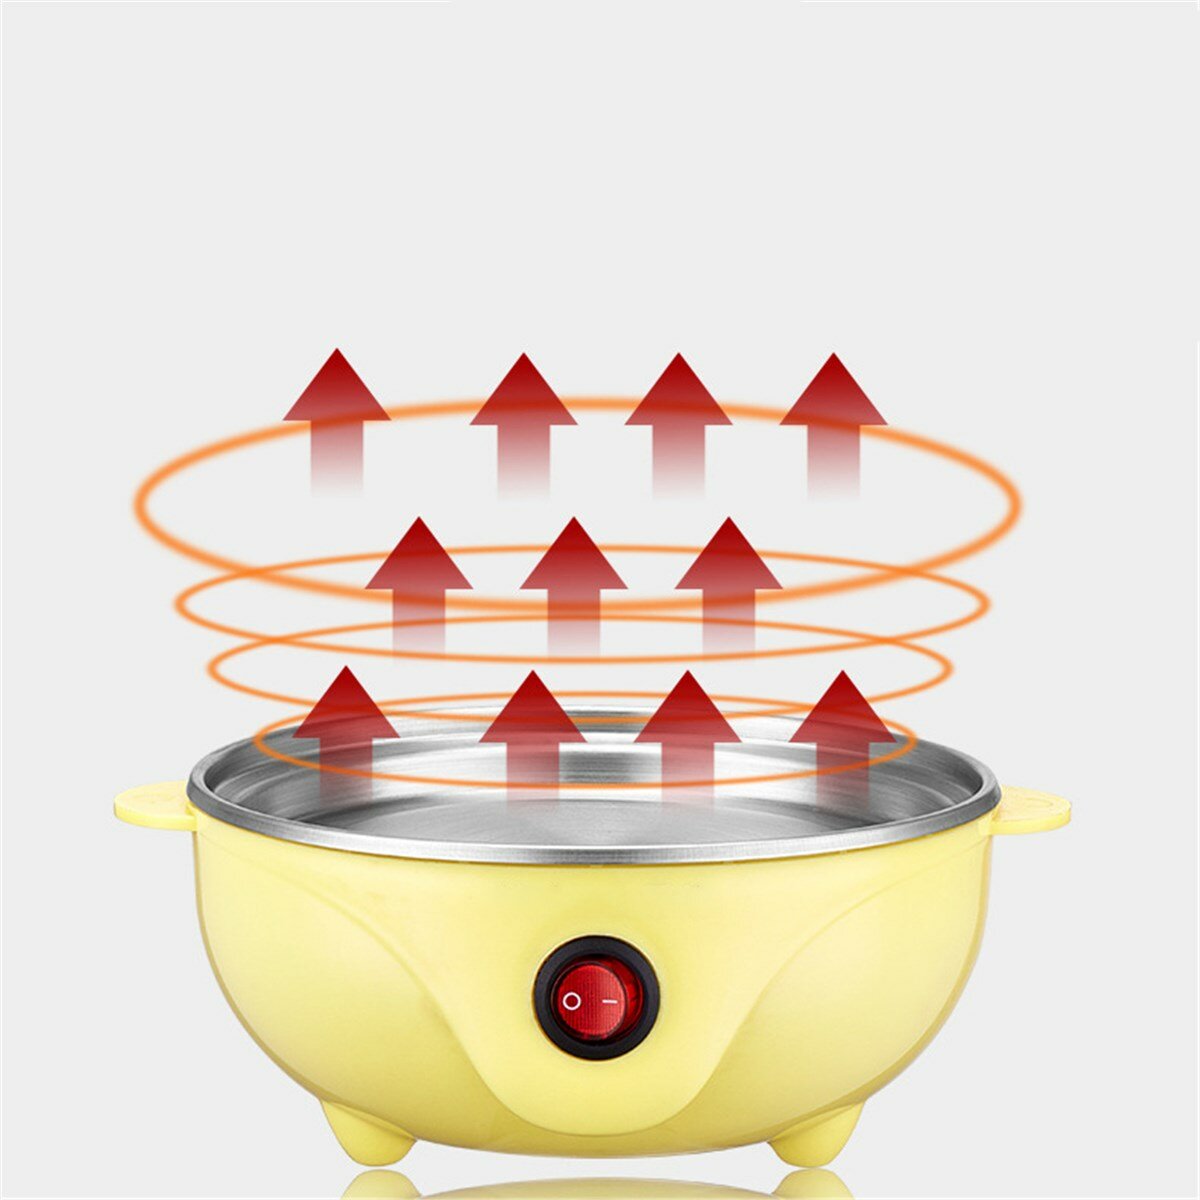 Portable Egg Steamer Kitchenware Double Layer Electric Egg Cooker Boiler Heating Stainless Steel Steamer Pan Cooking Tools